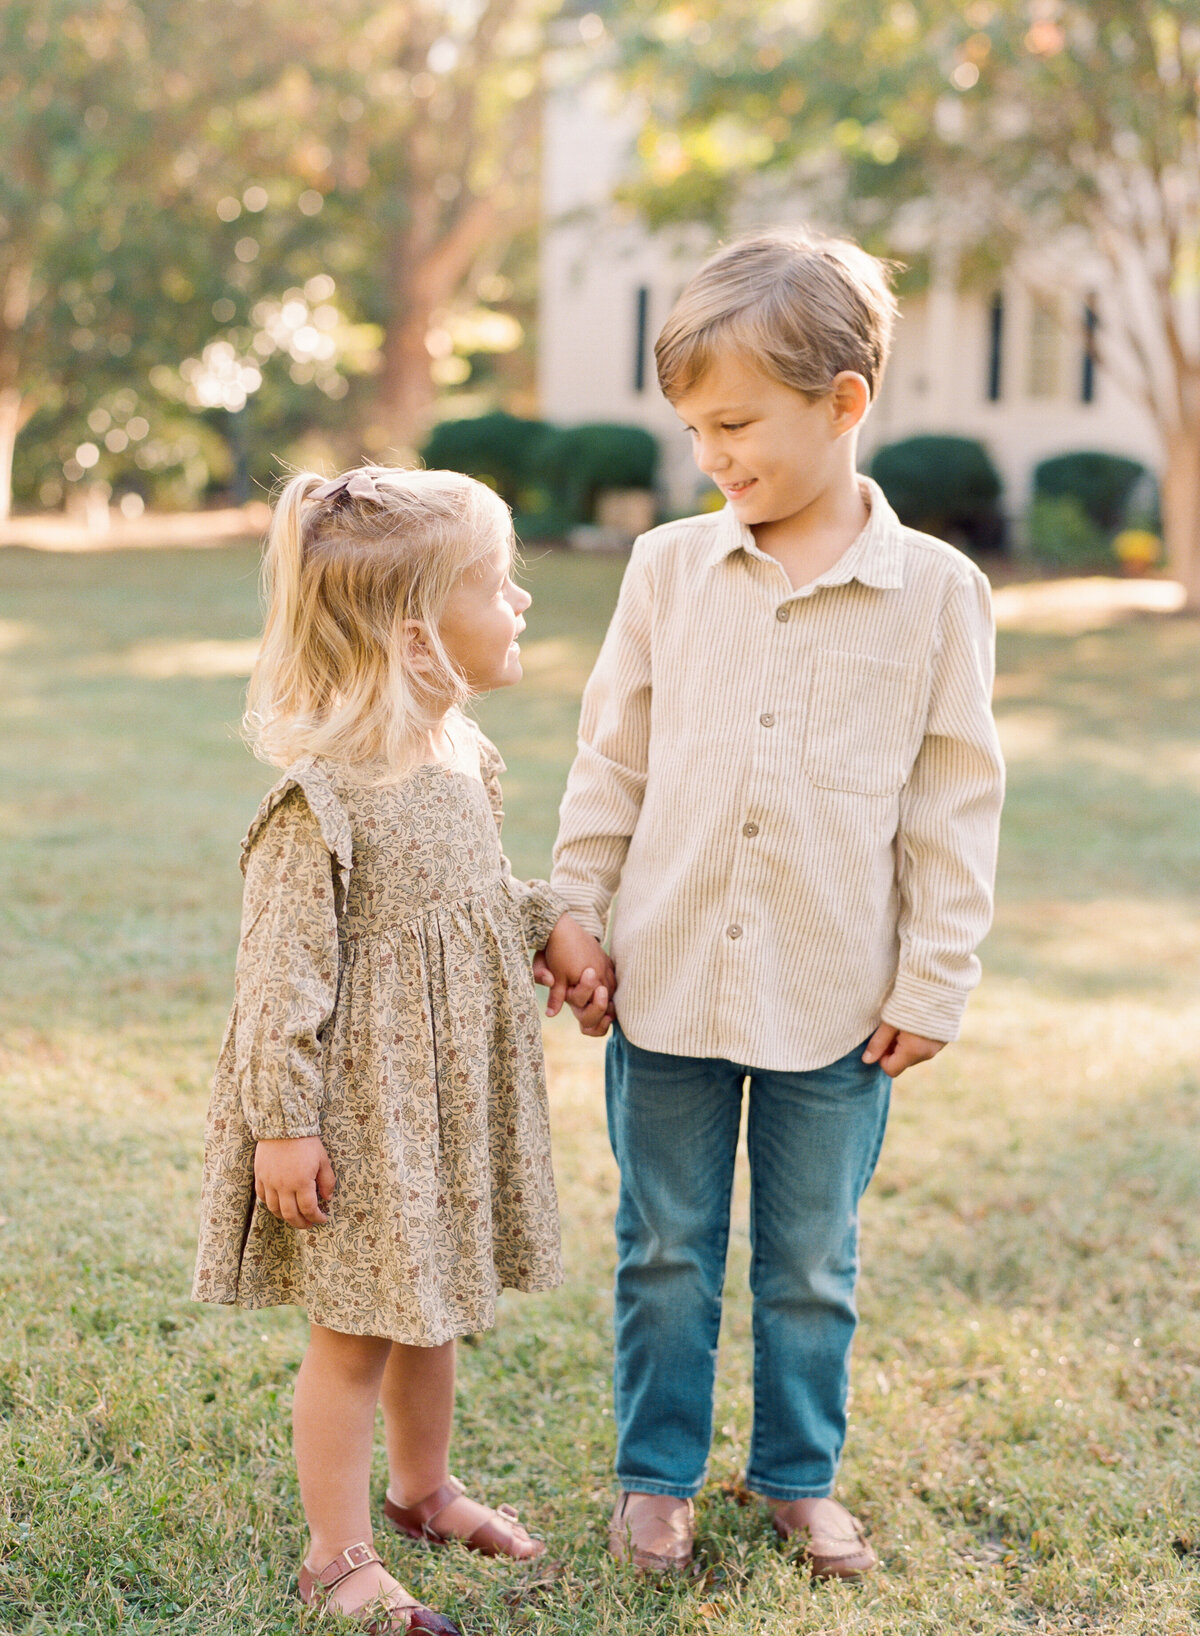 Siblings play during their fall family photos in Raleigh NC. Family walking during their family portrait session in Wake Forest, NC. Photographed by Raleigh family photographer A.J. Dunlap Photography.